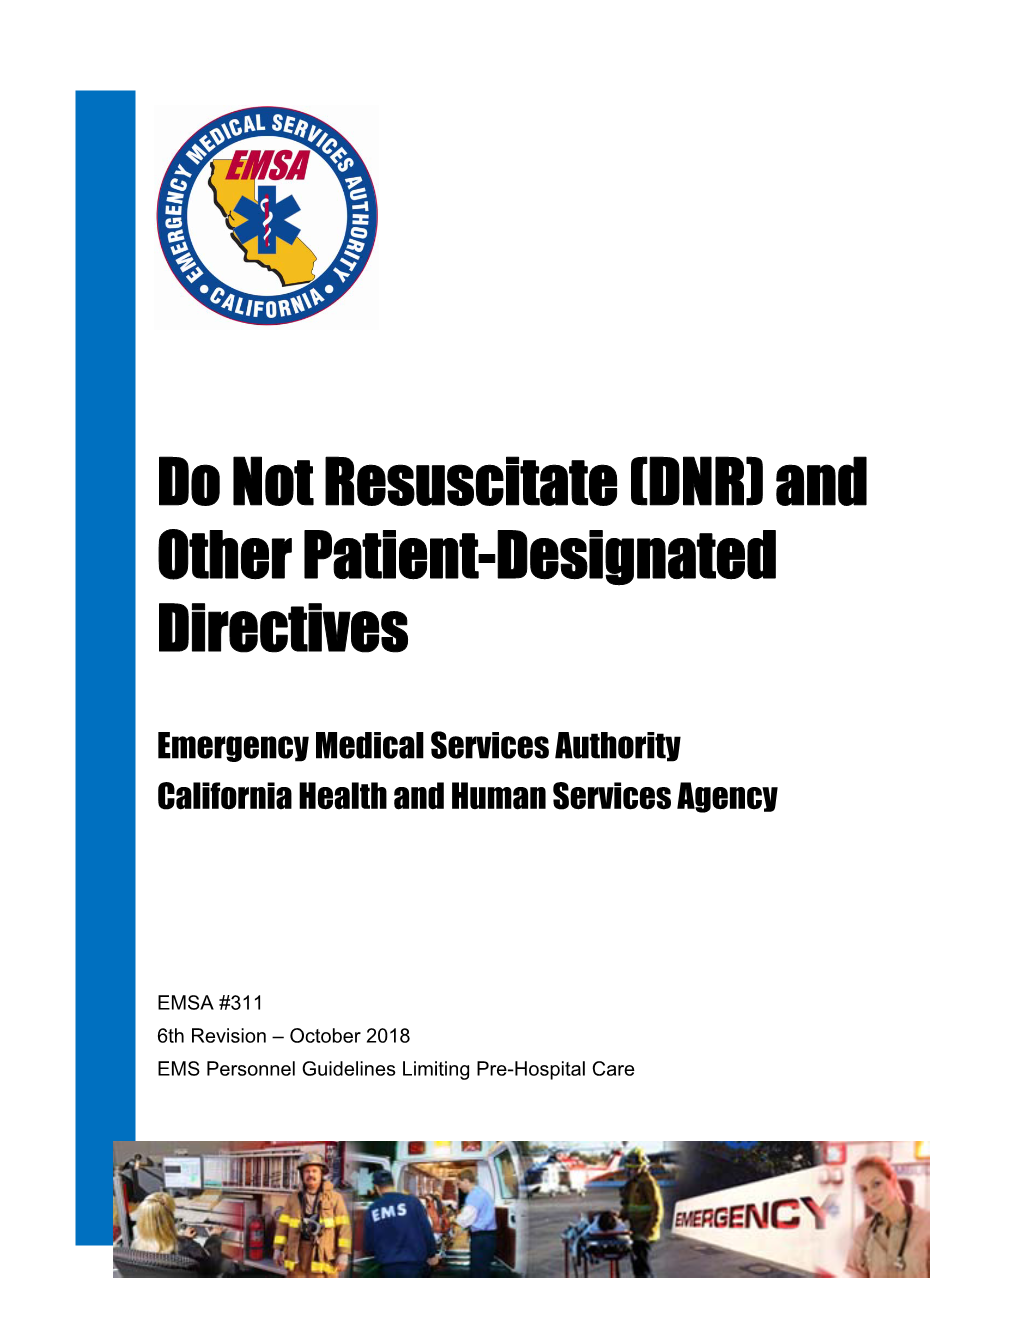 Do Not Resuscitate (DNR) and Other Patient-Designated Directives